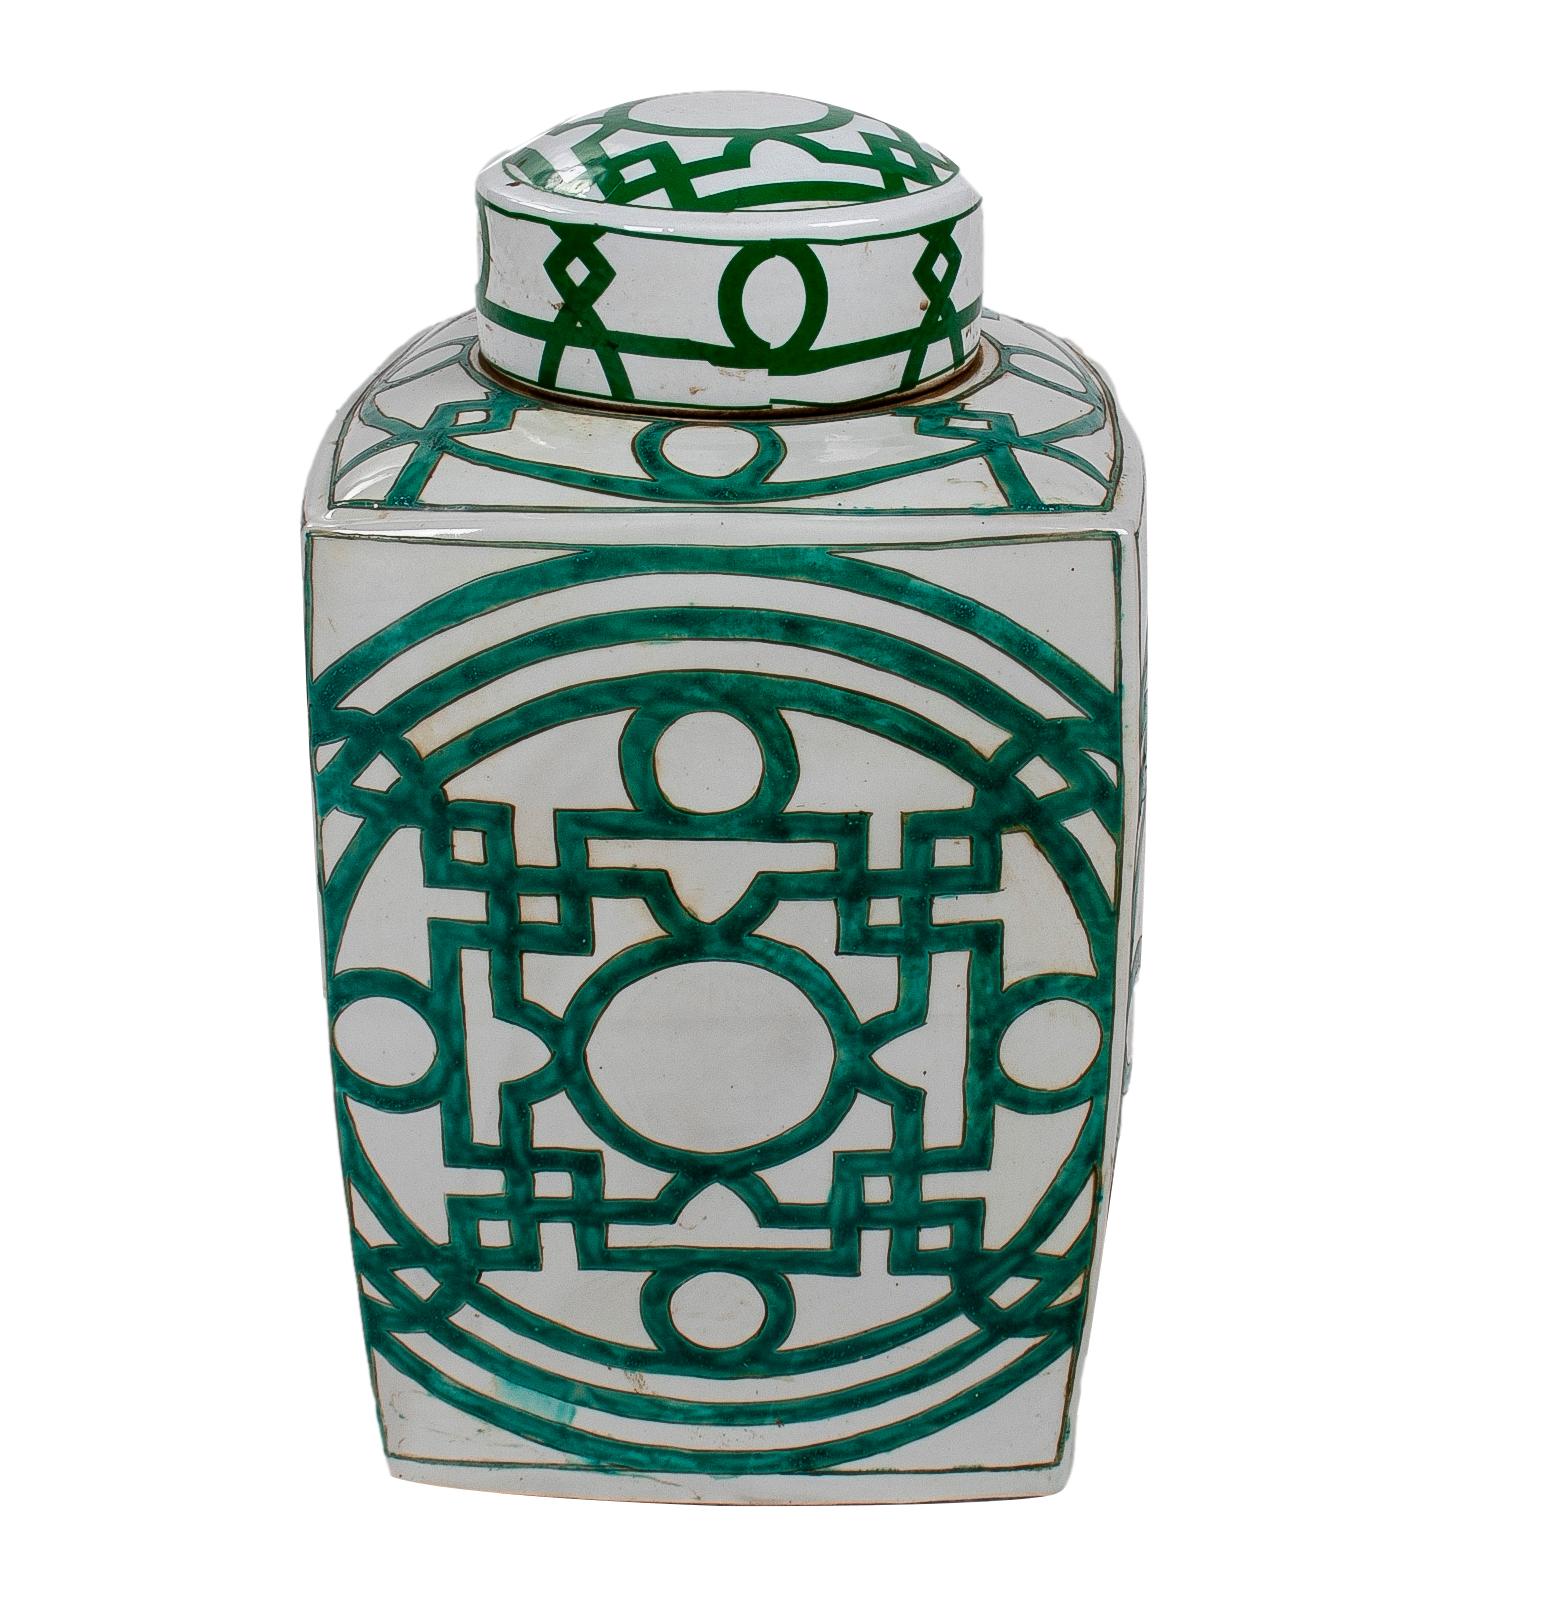 Pair of Asian white glazed porcelain urns with green geometric decorations and lids.